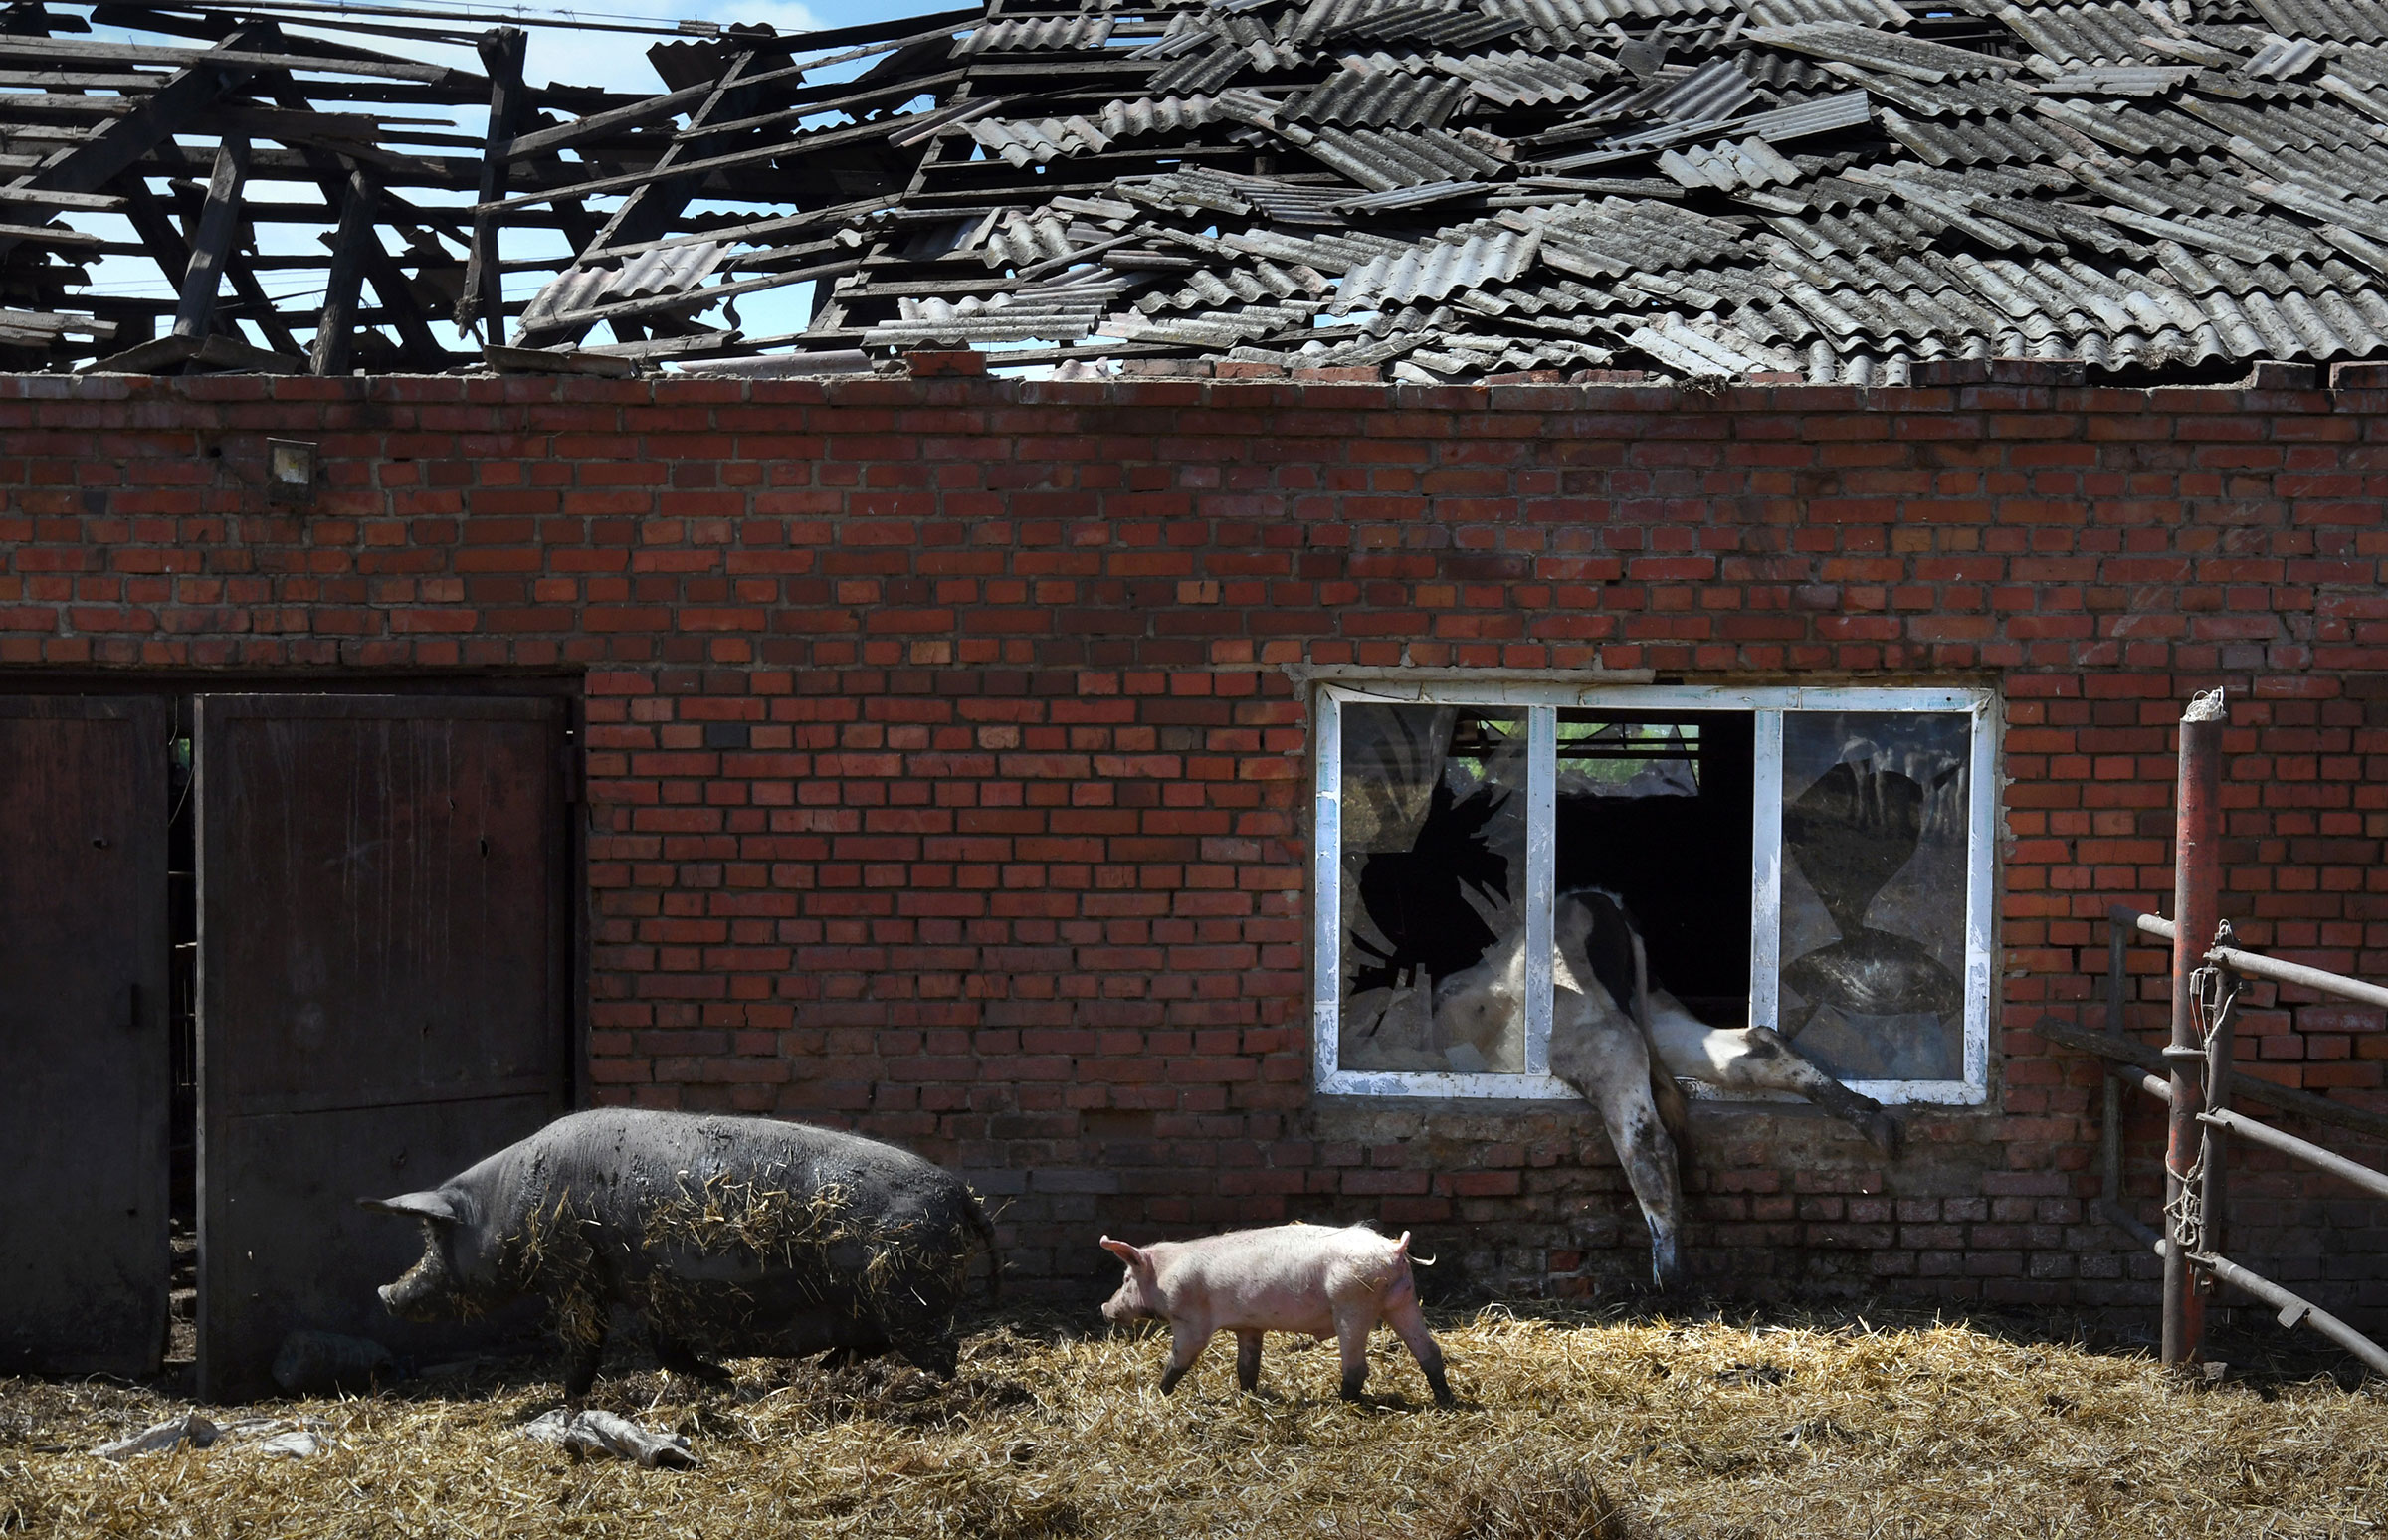 A farm in Vilkhivka, Ukraine, pictured on May 14, lost 80 cows and 30 pigs during two months of Russian artillery shelling and occupation. (Carol Guzy—ZUMA)